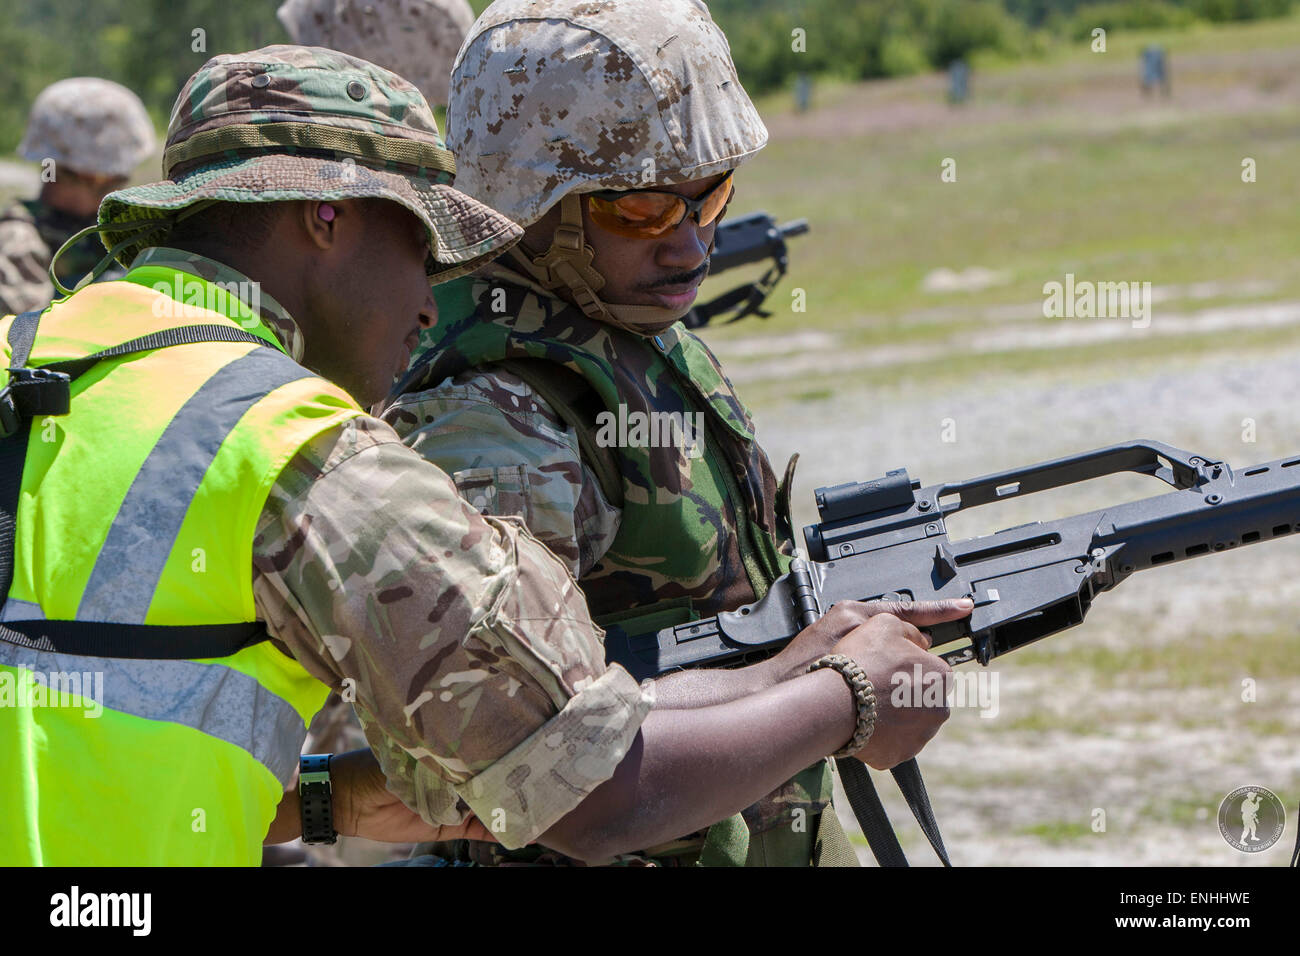 An infantryman with Bermuda Regiment clears his Heckler & Koch G36C compact carbine at the firing range during Exercise Island Warrior May 4, 2015 in Camp Lejeune, N.C. Stock Photo